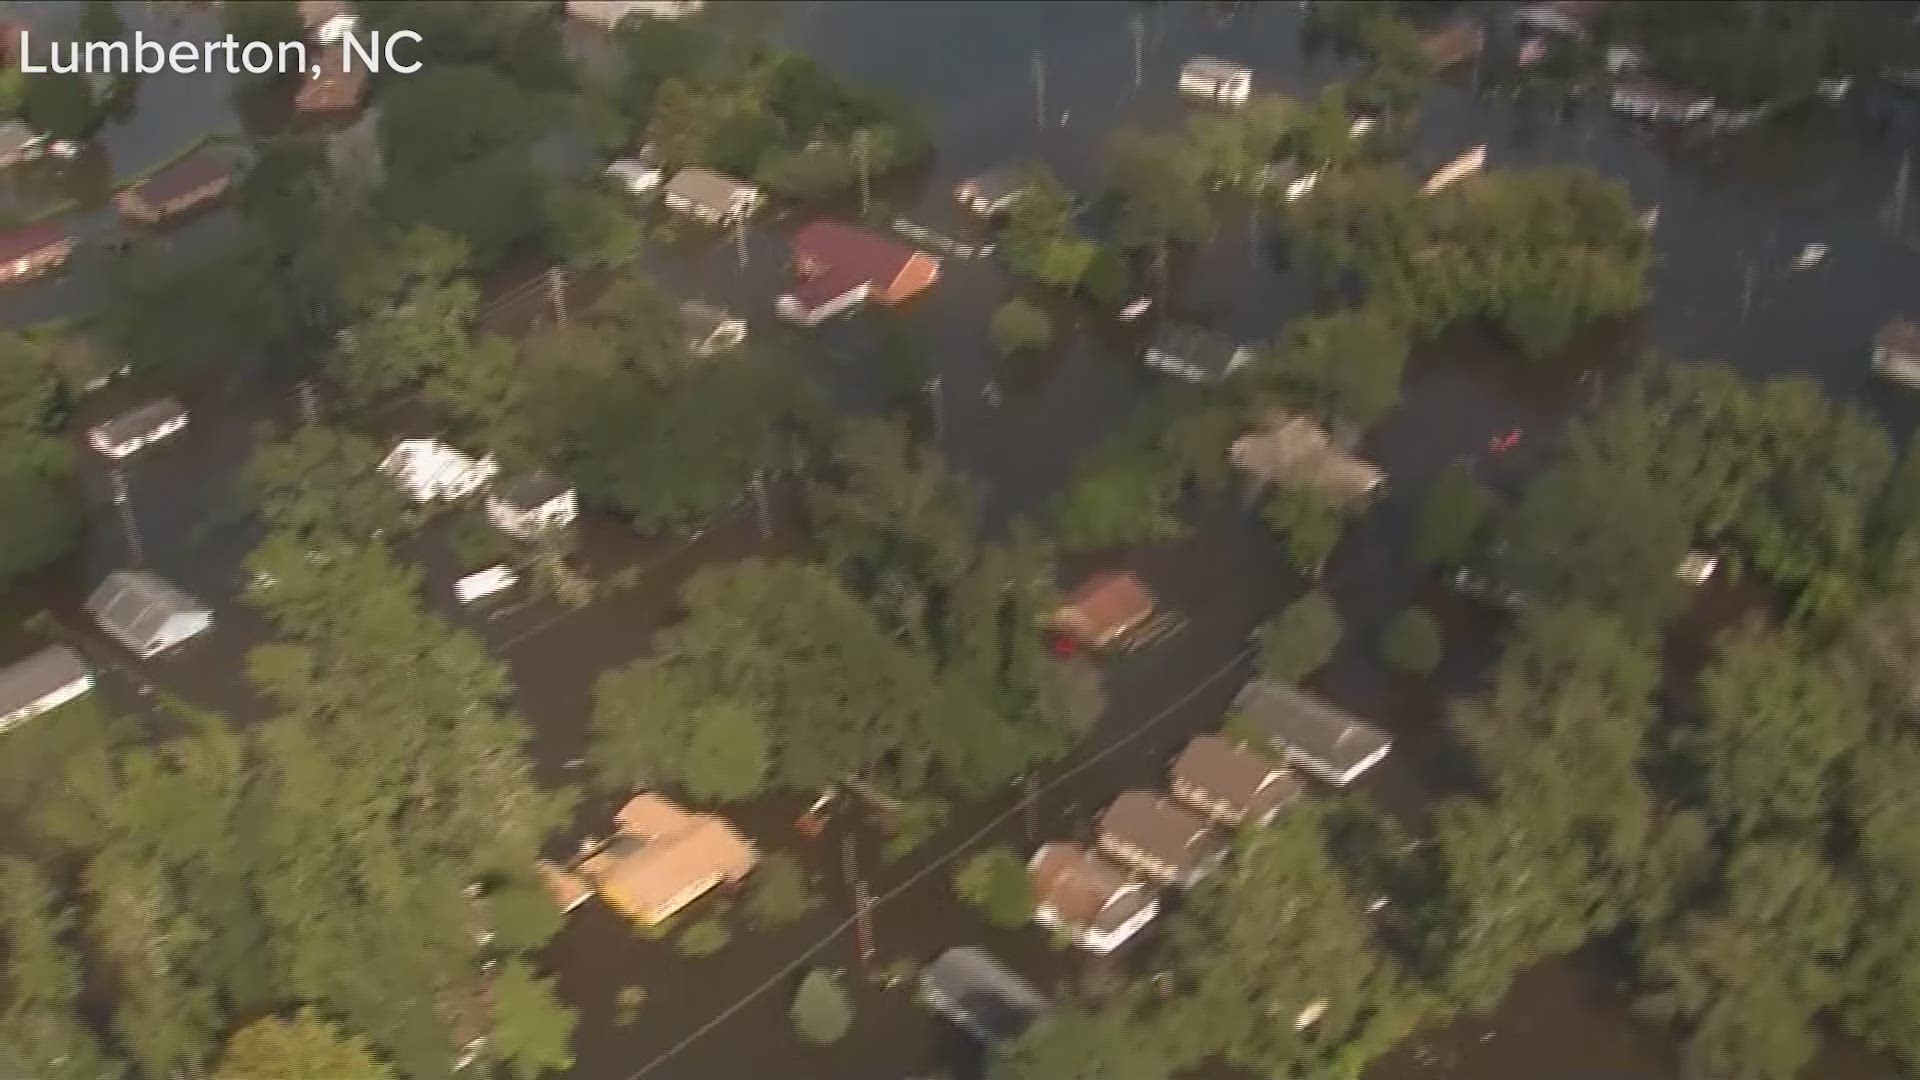 Florence inundated the city of Lumberton, N.C., with nearly 23 inches of water, according to the National Weather Service. Aerial footage shows homes surrounded by water, boats navigating streets, and parts of I-95 underwater.